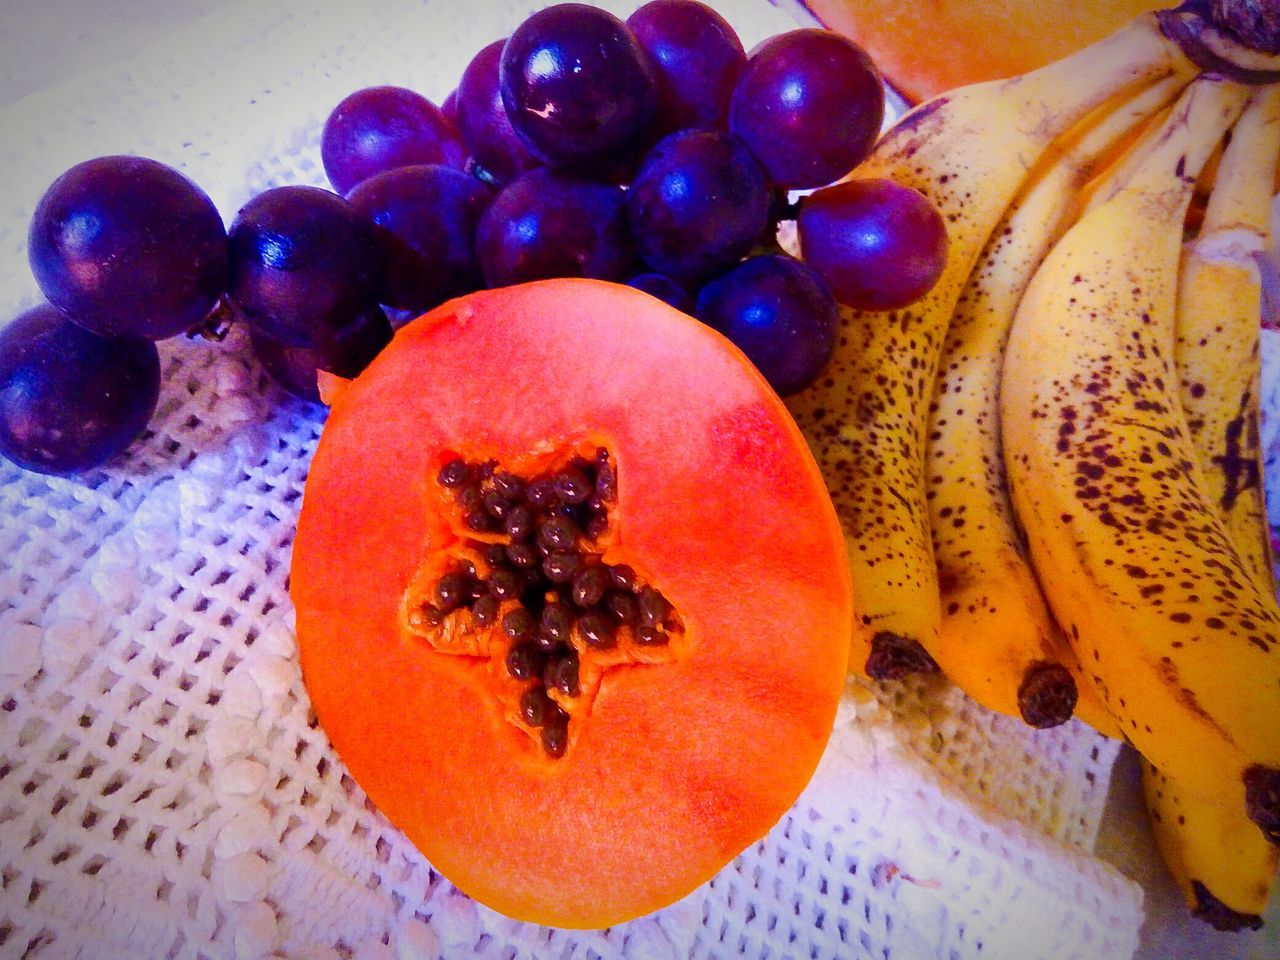 fruit, healthy eating, food, food and drink, wellbeing, freshness, indoors, no people, still life, table, close-up, orange color, grape, pomegranate, seed, choice, plate, cross section, ripe, papaya, orange